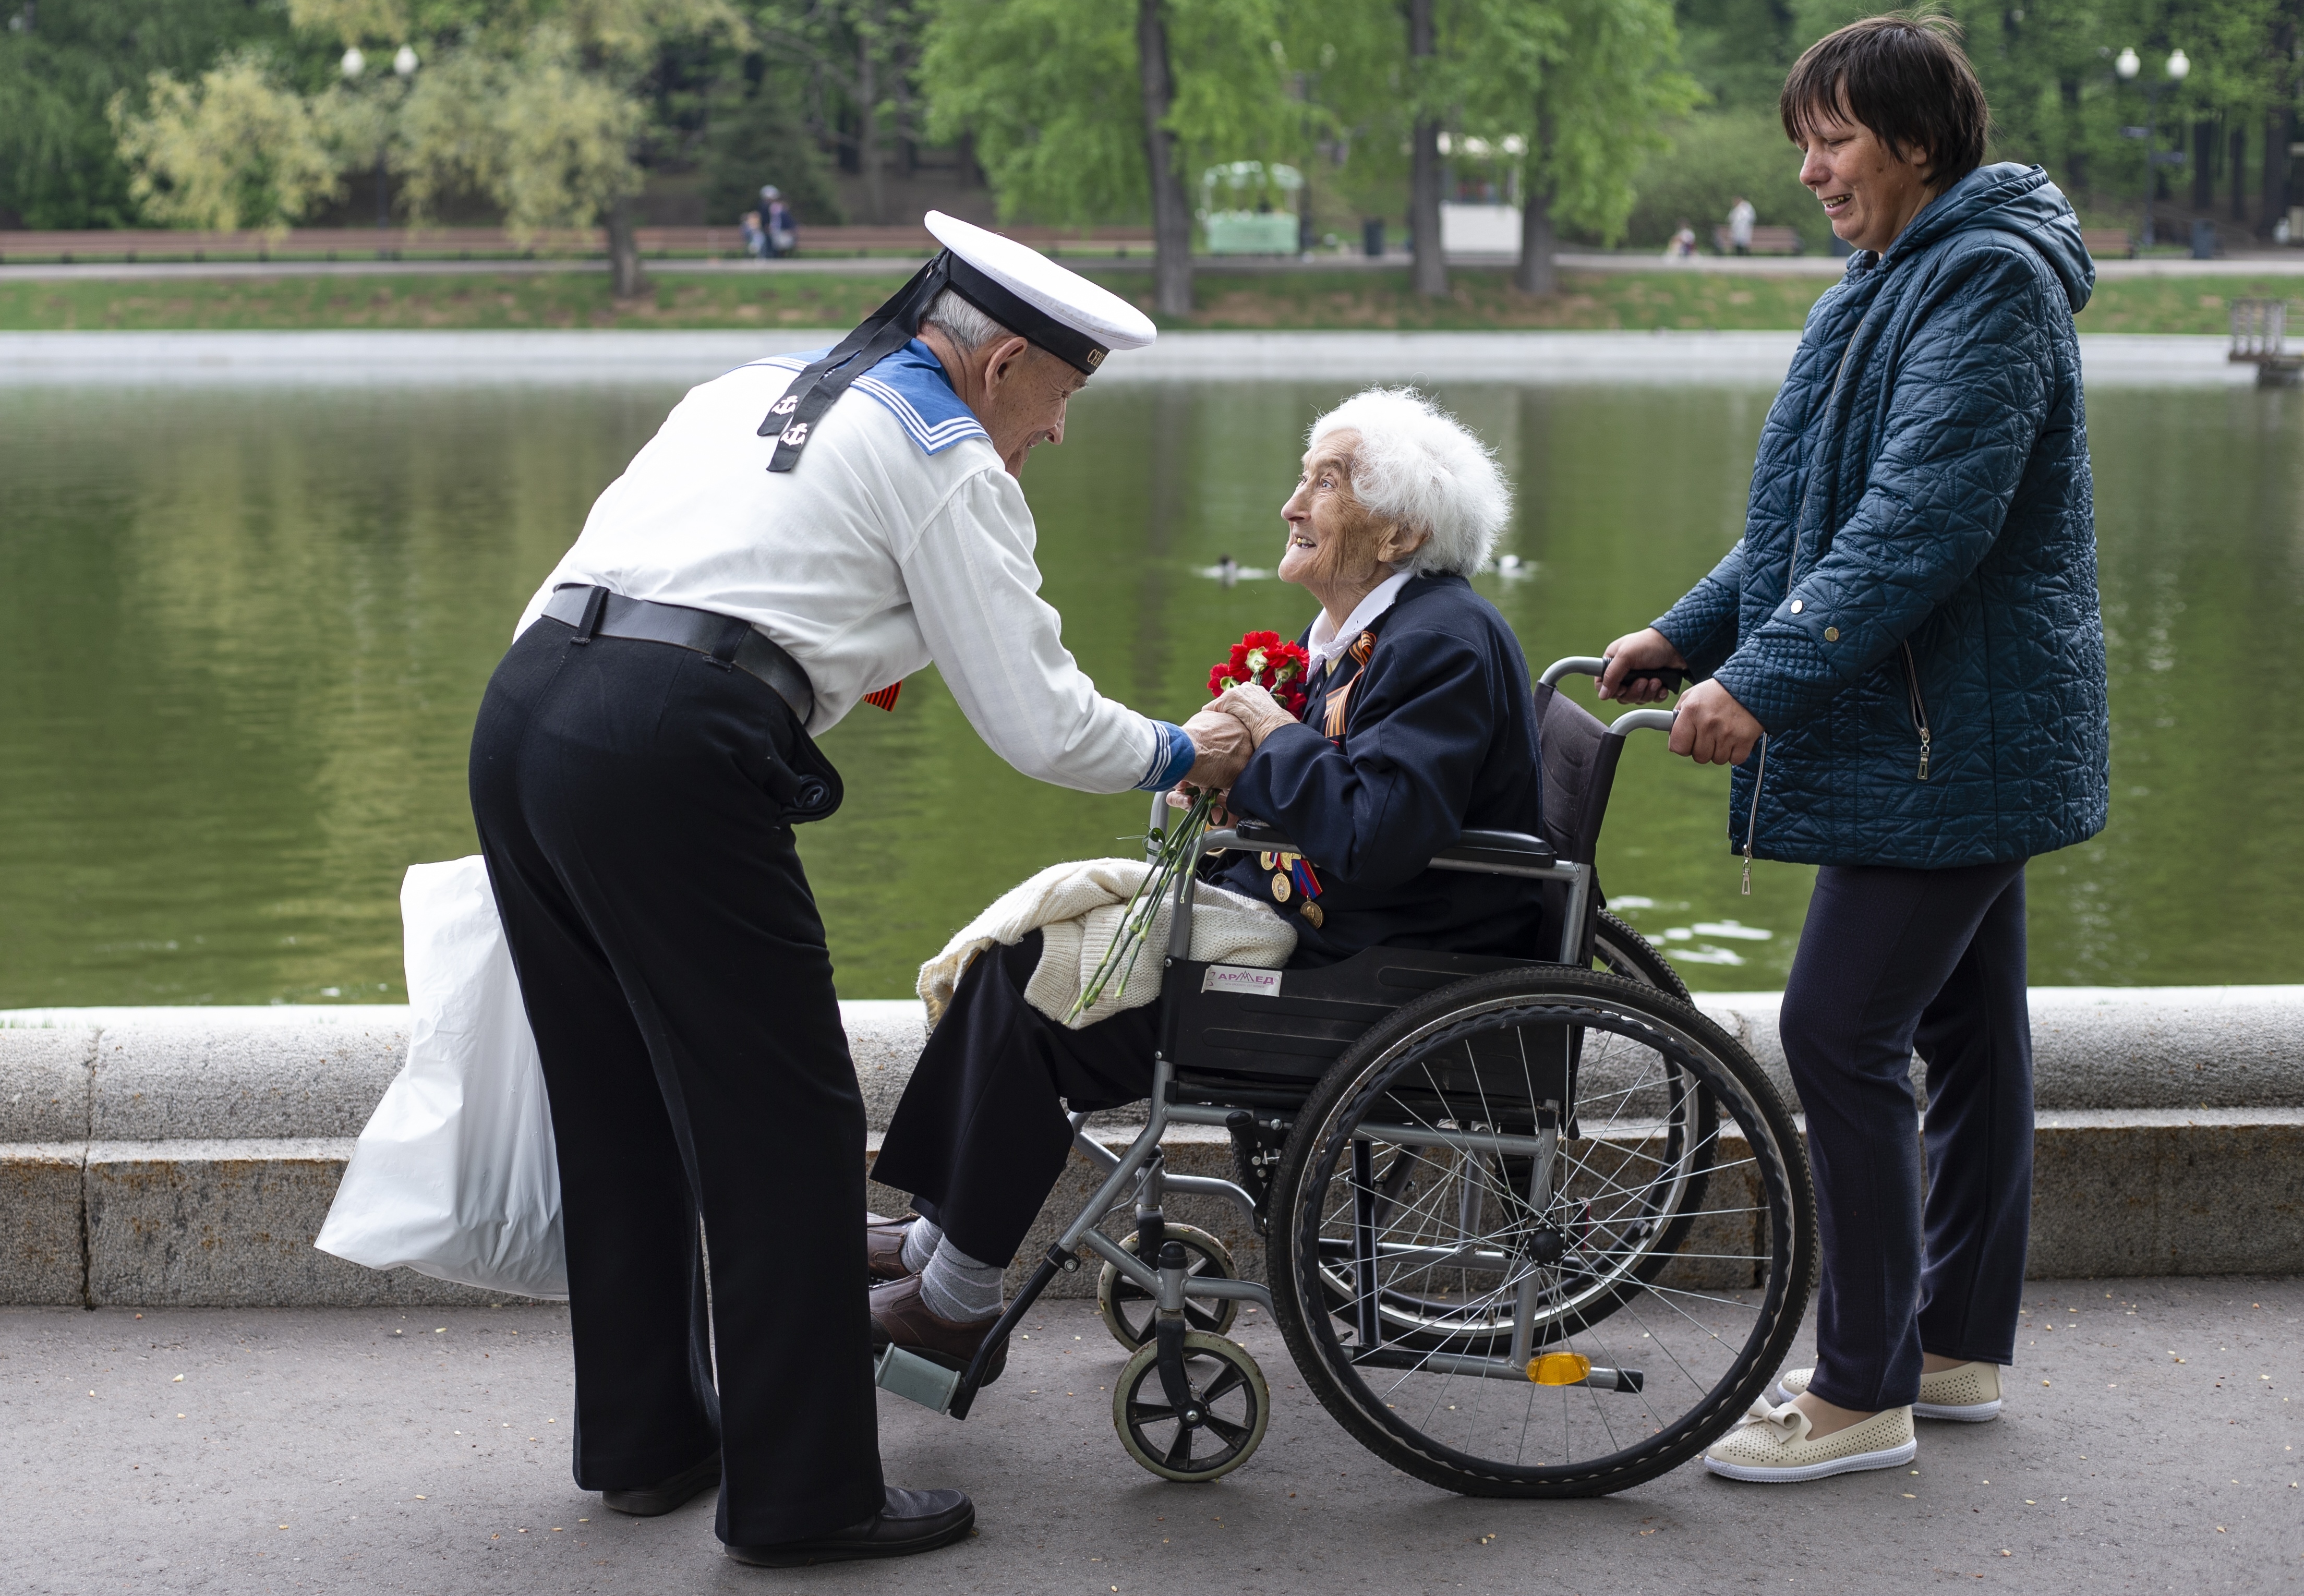 Victor Novopashin, 87, a Russian WWII veteran, left, greets Maria Kanushkina, 95, center, also a Russian WWII veteran celebrating 74 years since the victory in WWII in Gorky Park in Moscow, Russia, Thursday, May 9, 2019. (AP Photo/Alexander Zemlianichenko Jr.)